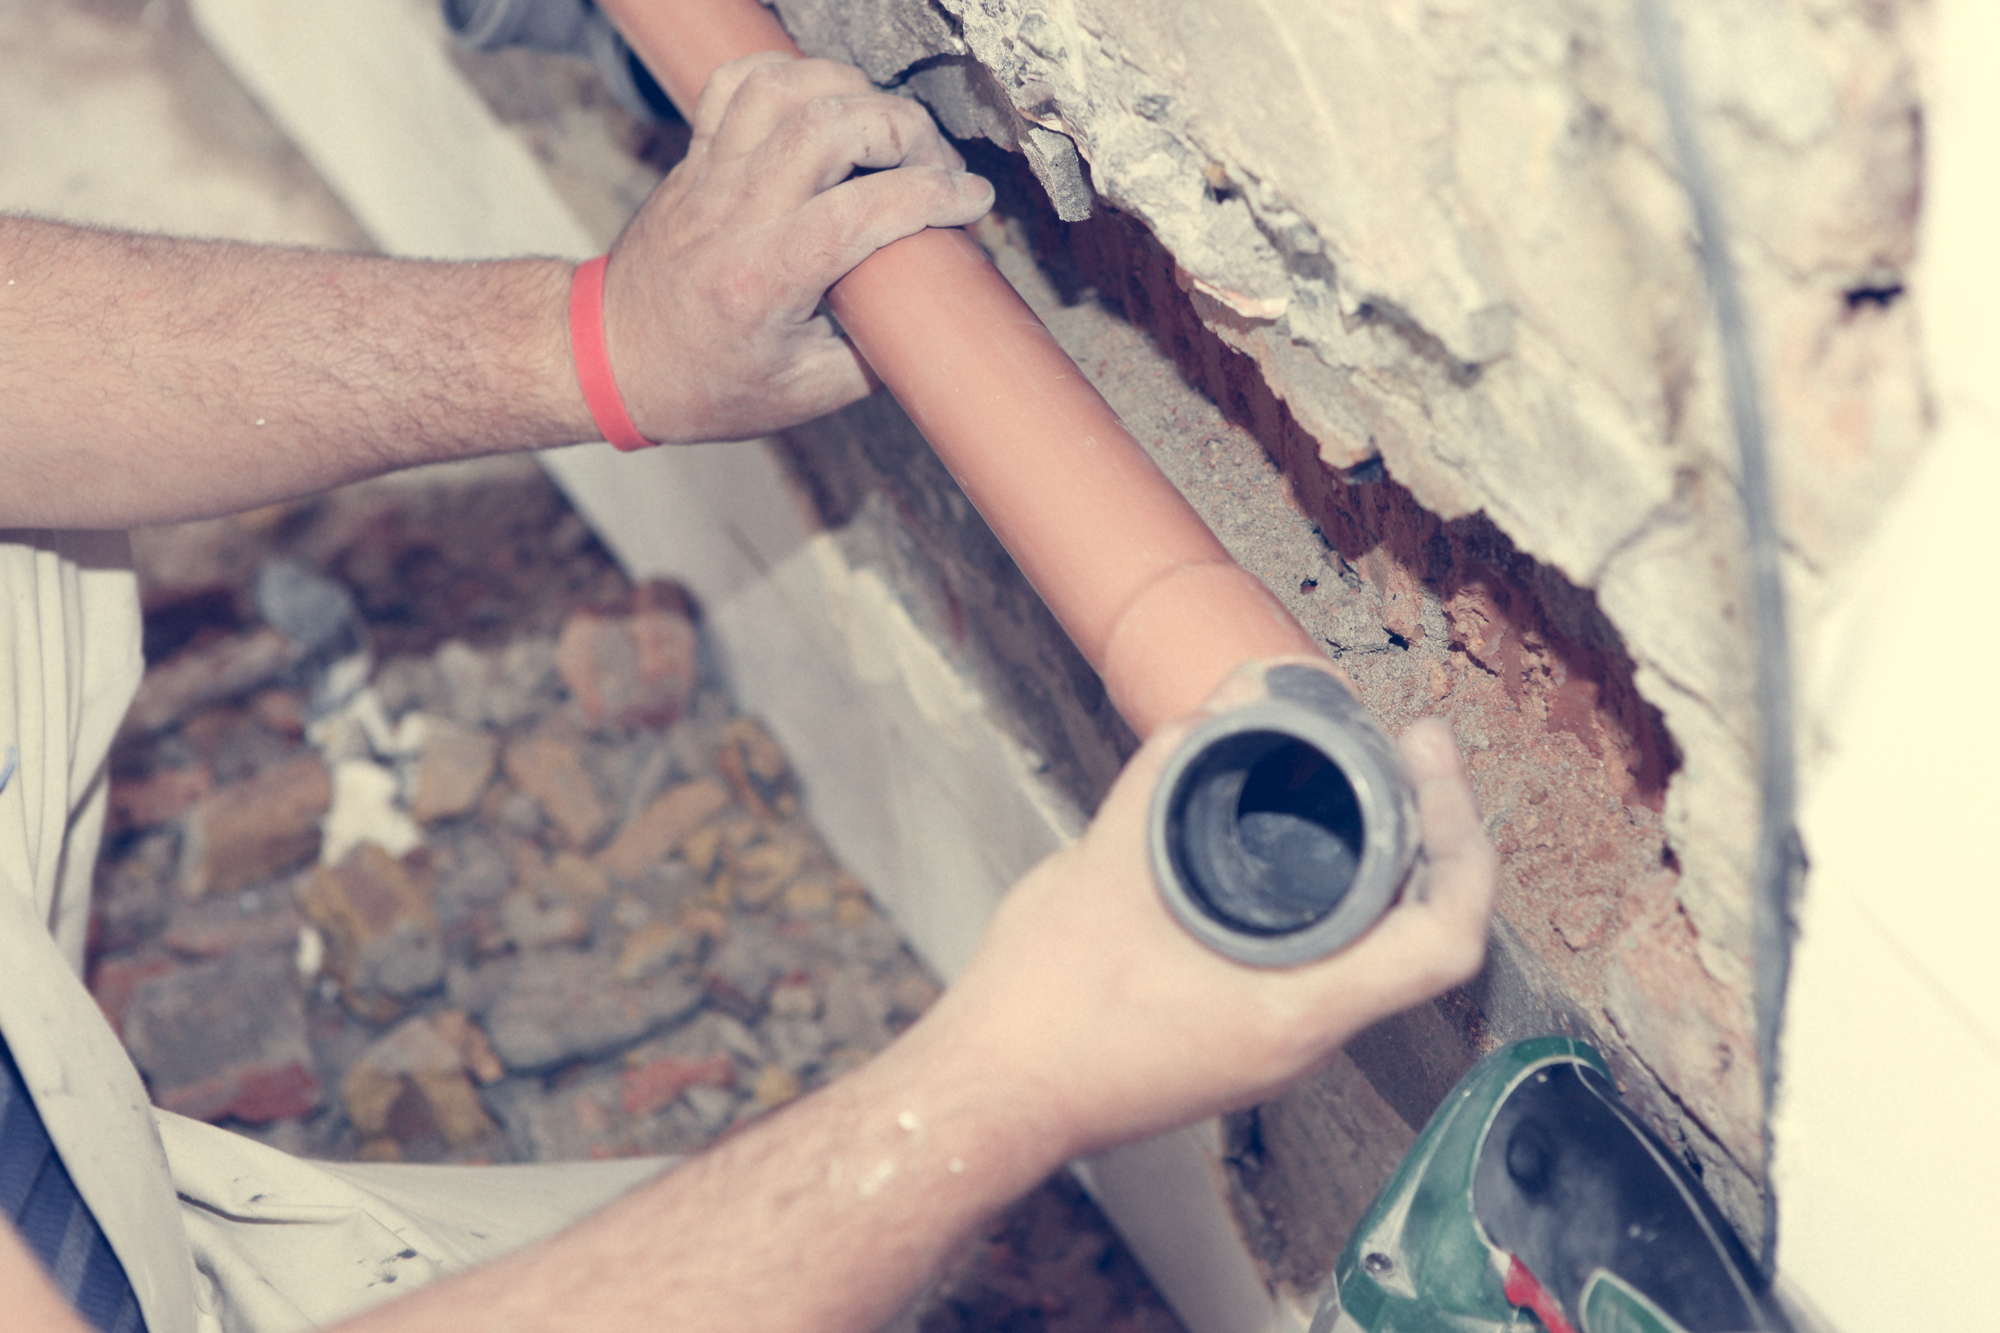 The Top Ten Plumbing Services: The Essential Guide for Homeowners